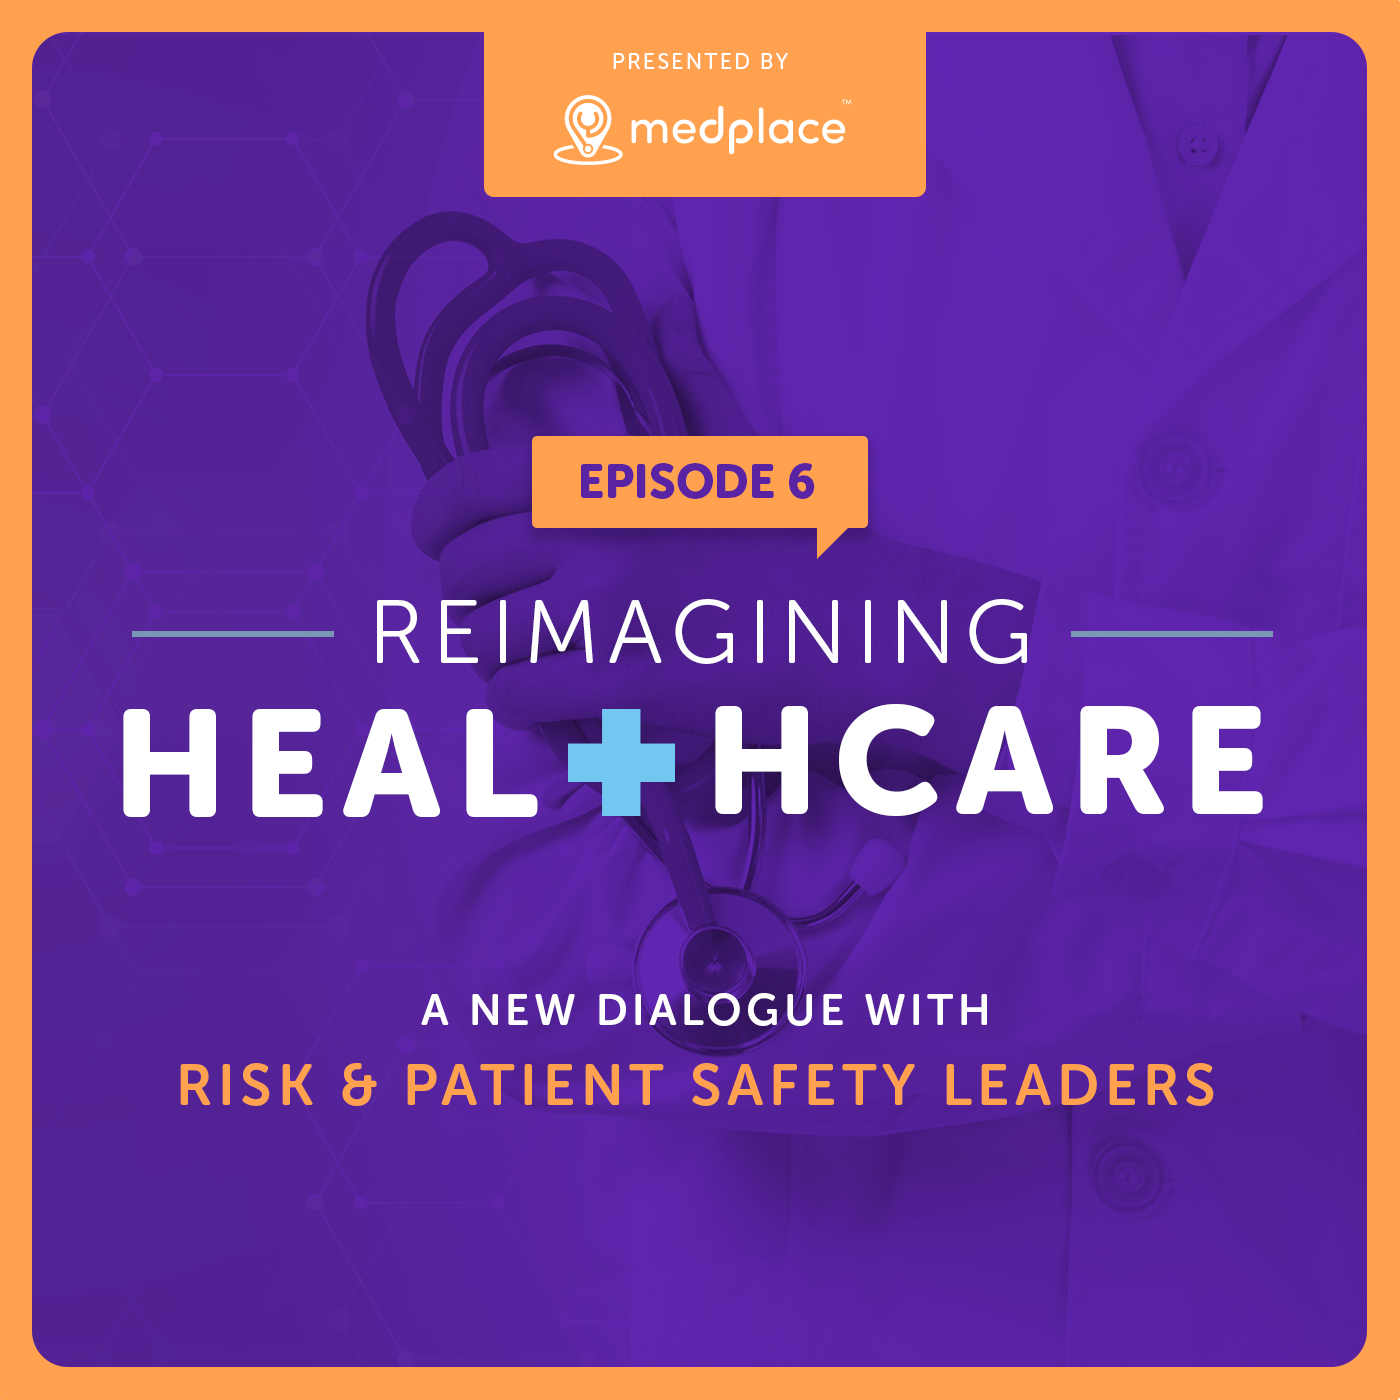 Episode 6 - Reimagining Healthcare - A New Dialogue with Risk and patient Safety Leaders